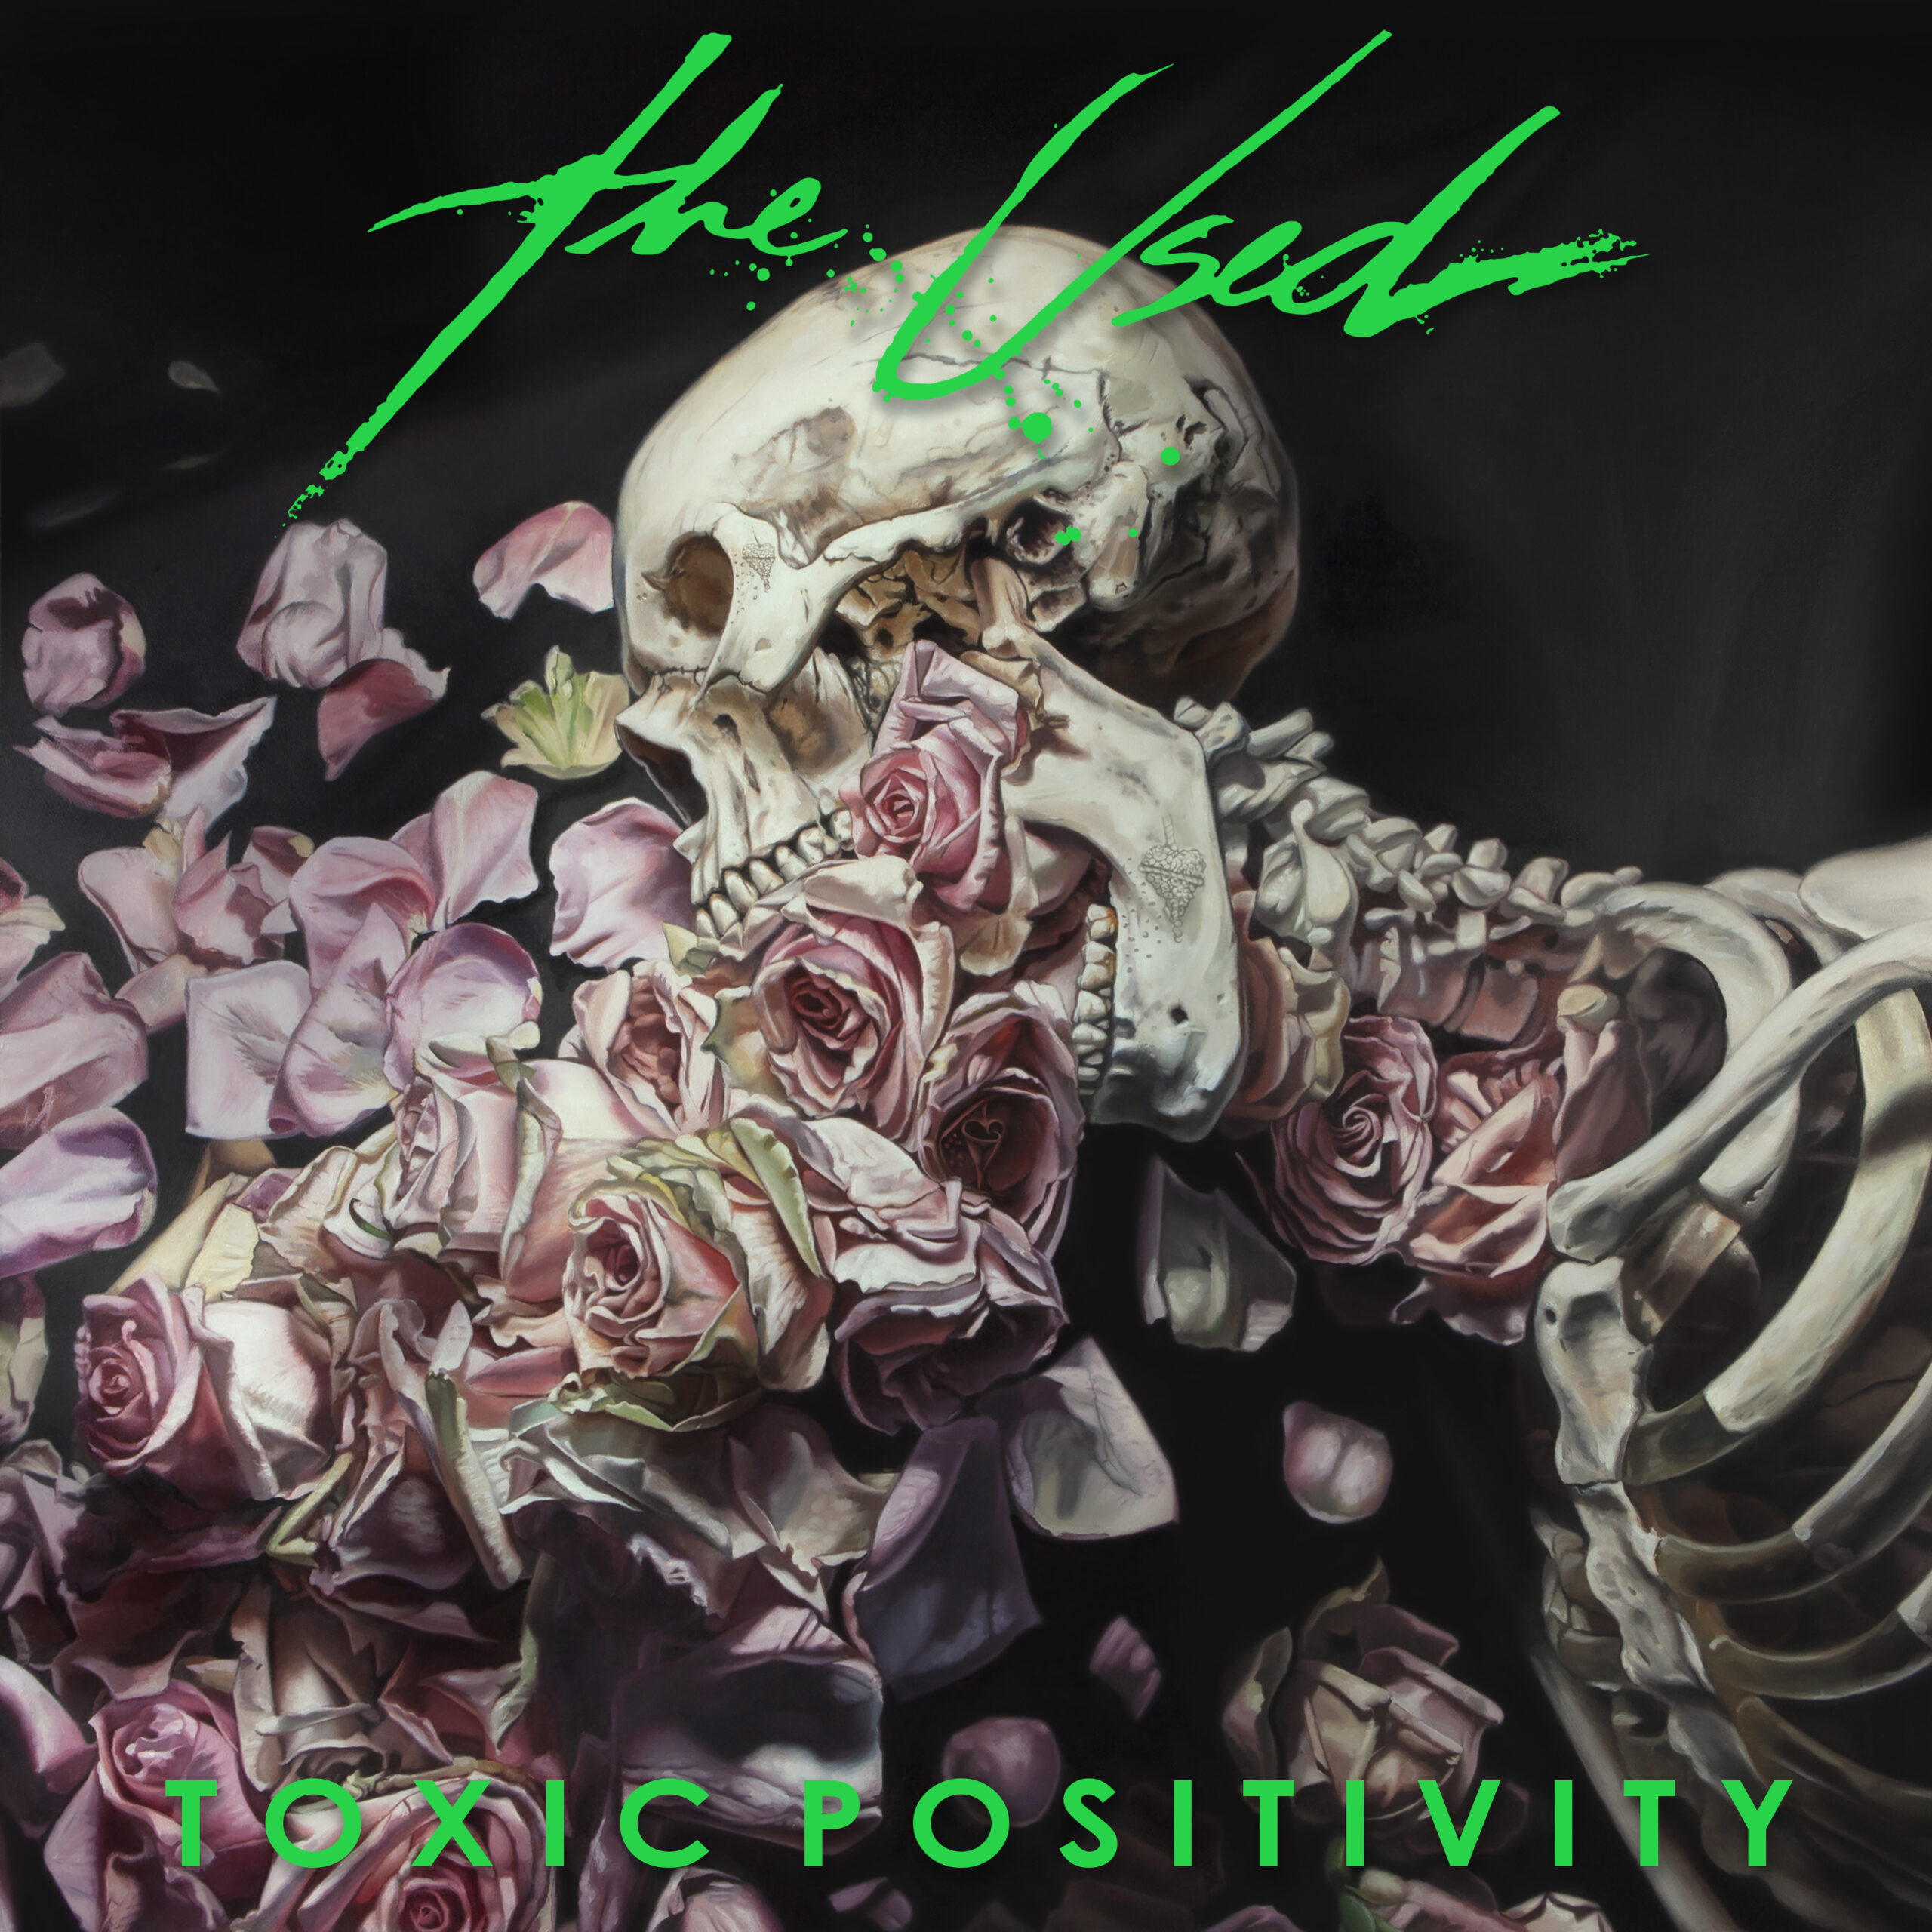 ALBUM REVIEW : The Used take listeners on an rollercoaster of emotion with new album; ‘Toxic Positivity’